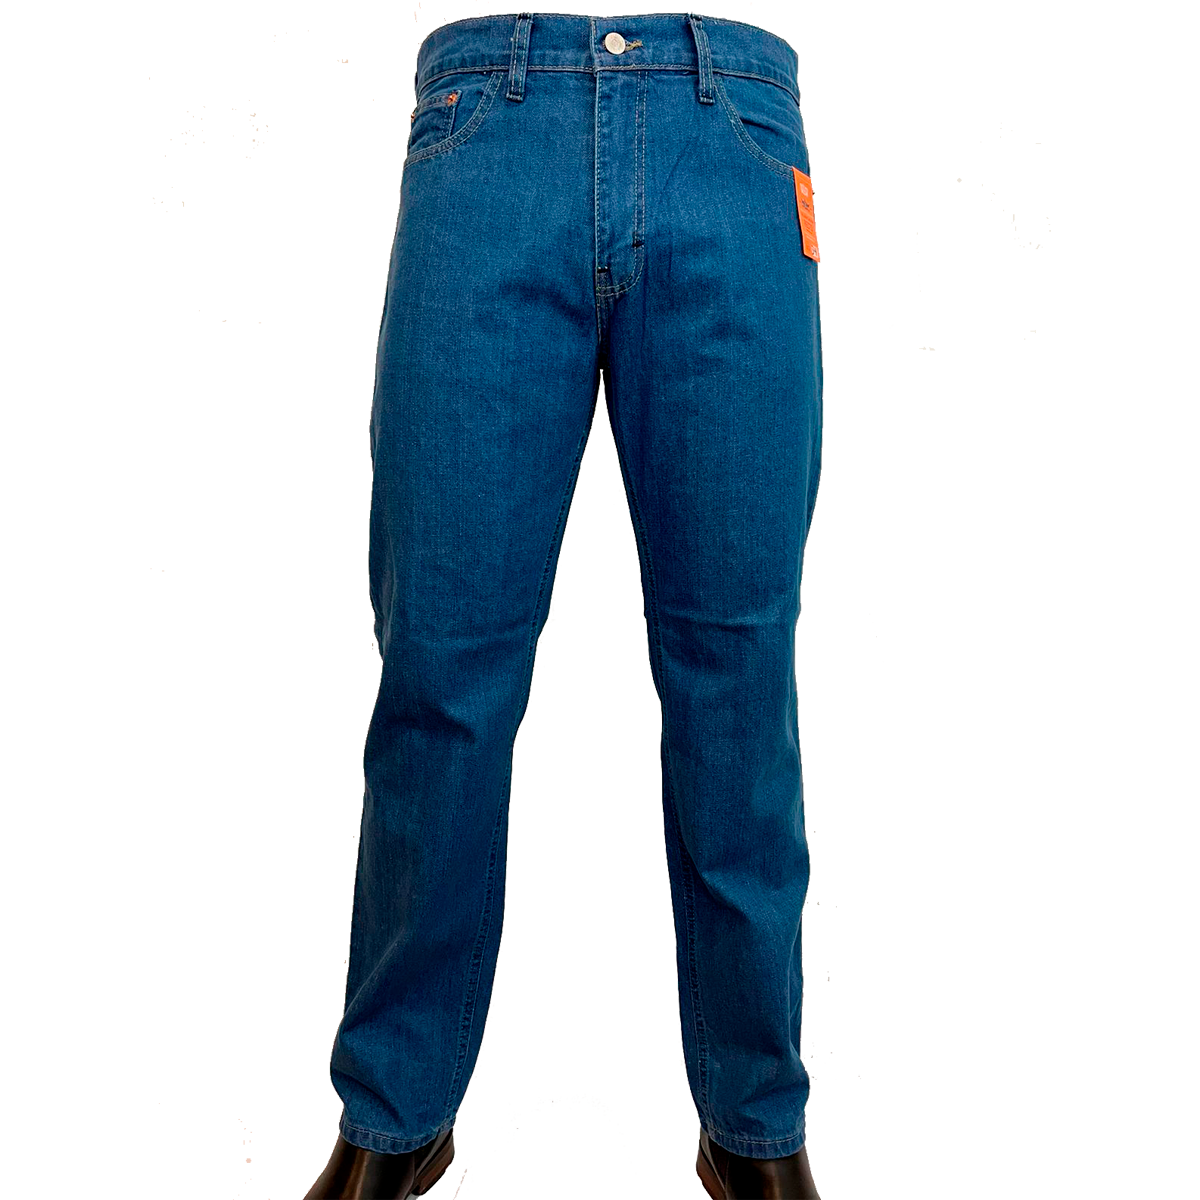 https://countryjeansmx.com/wp-content/uploads/2017/12/Country-Jeans-pantalon-recto-bleach-para-catalogo.png